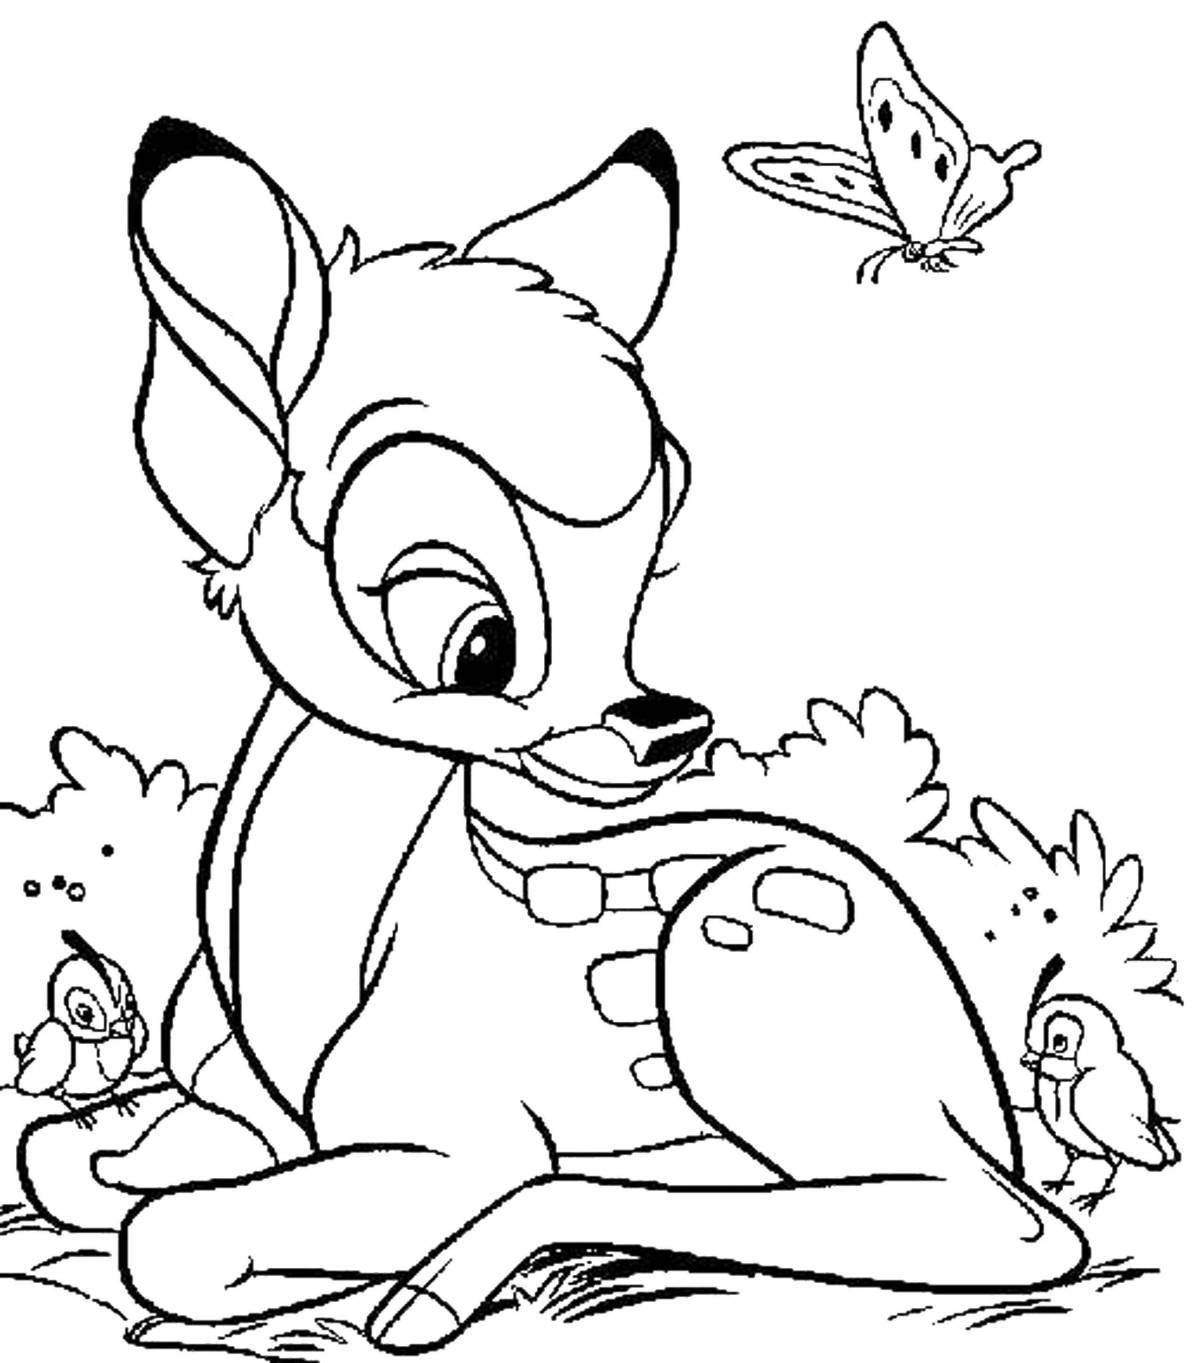 Cute cartoon character coloring book for 5-6 year olds